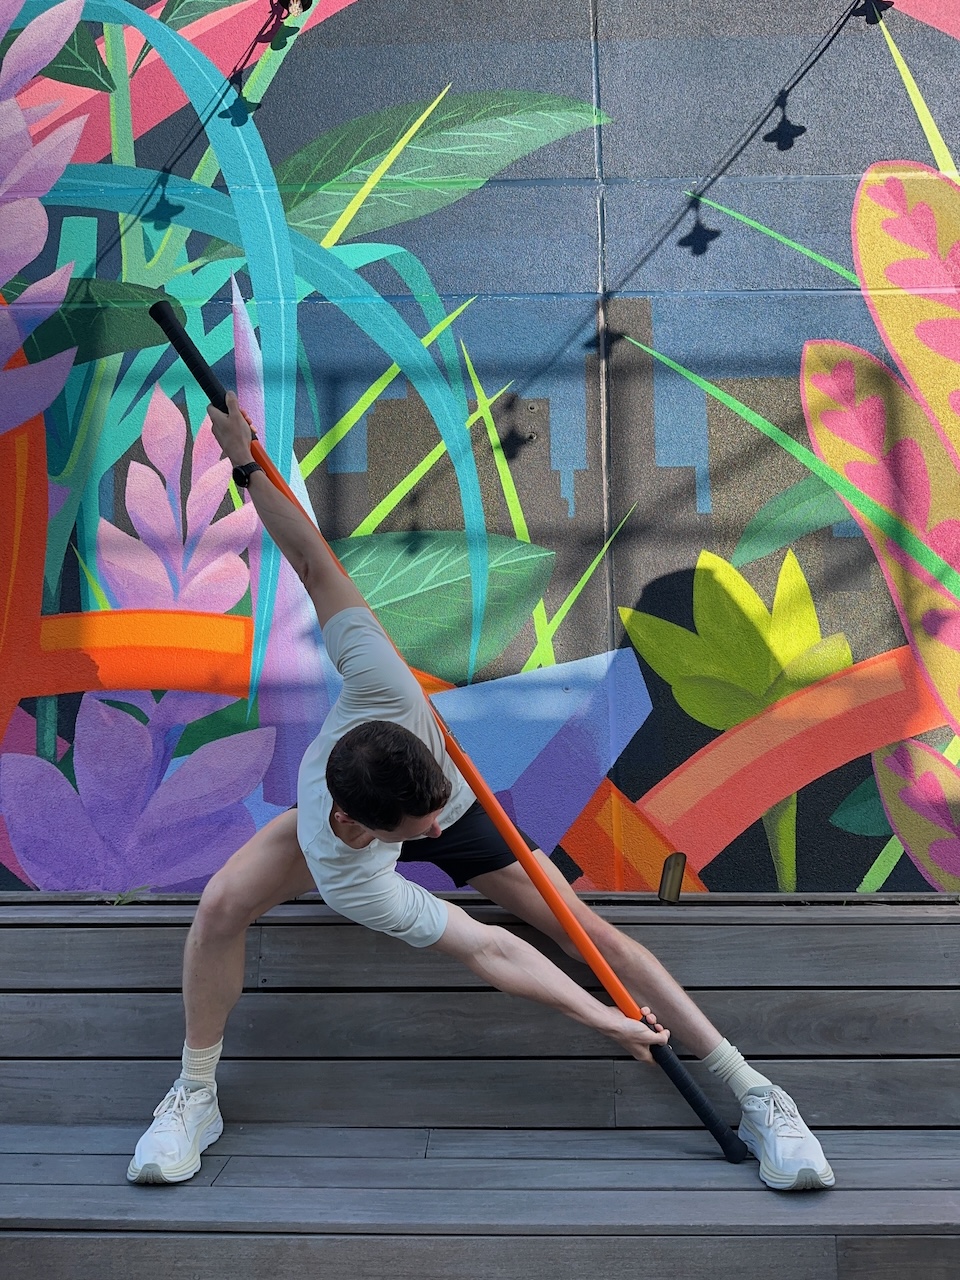 A person in athletic wear performs a stretch with an exercise bar against a colorful mural backdrop featuring abstract plant designs.